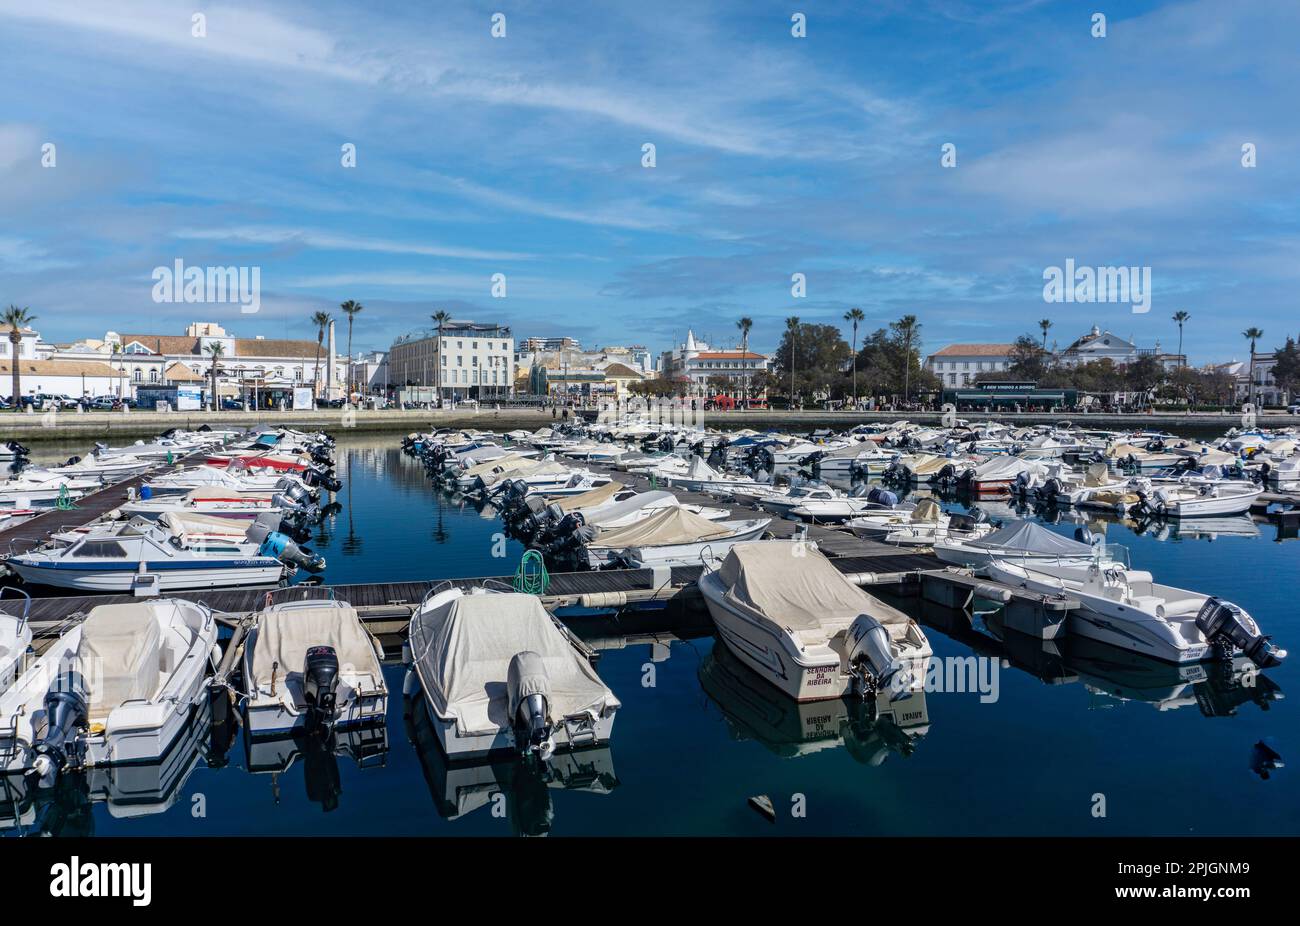 The boating marina in the port of Faro, Portugal Stock Photo